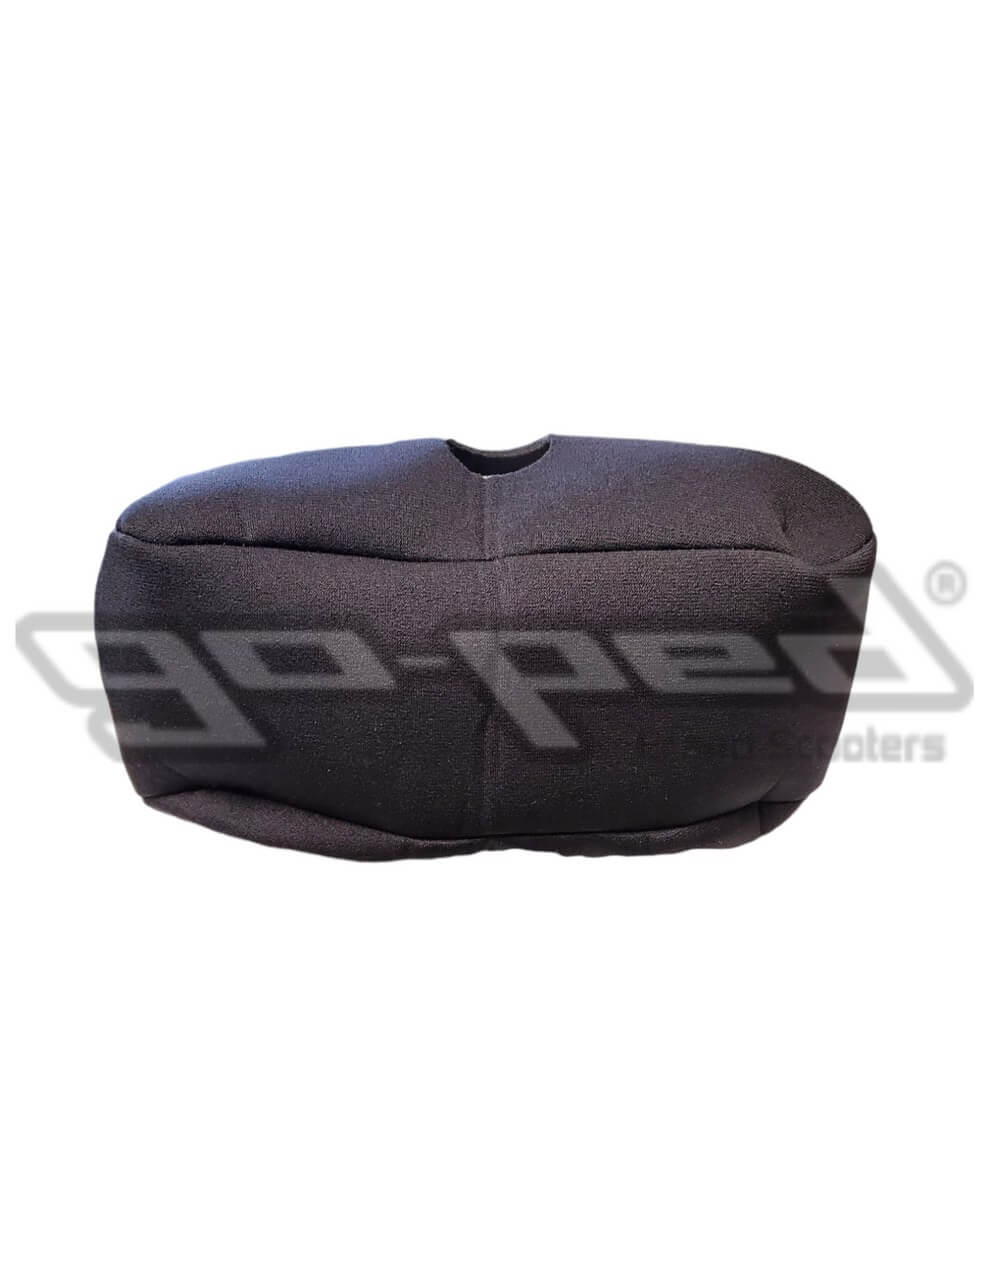 Go-Ped 1L GAS TANK COVER (3113C) for Scooters